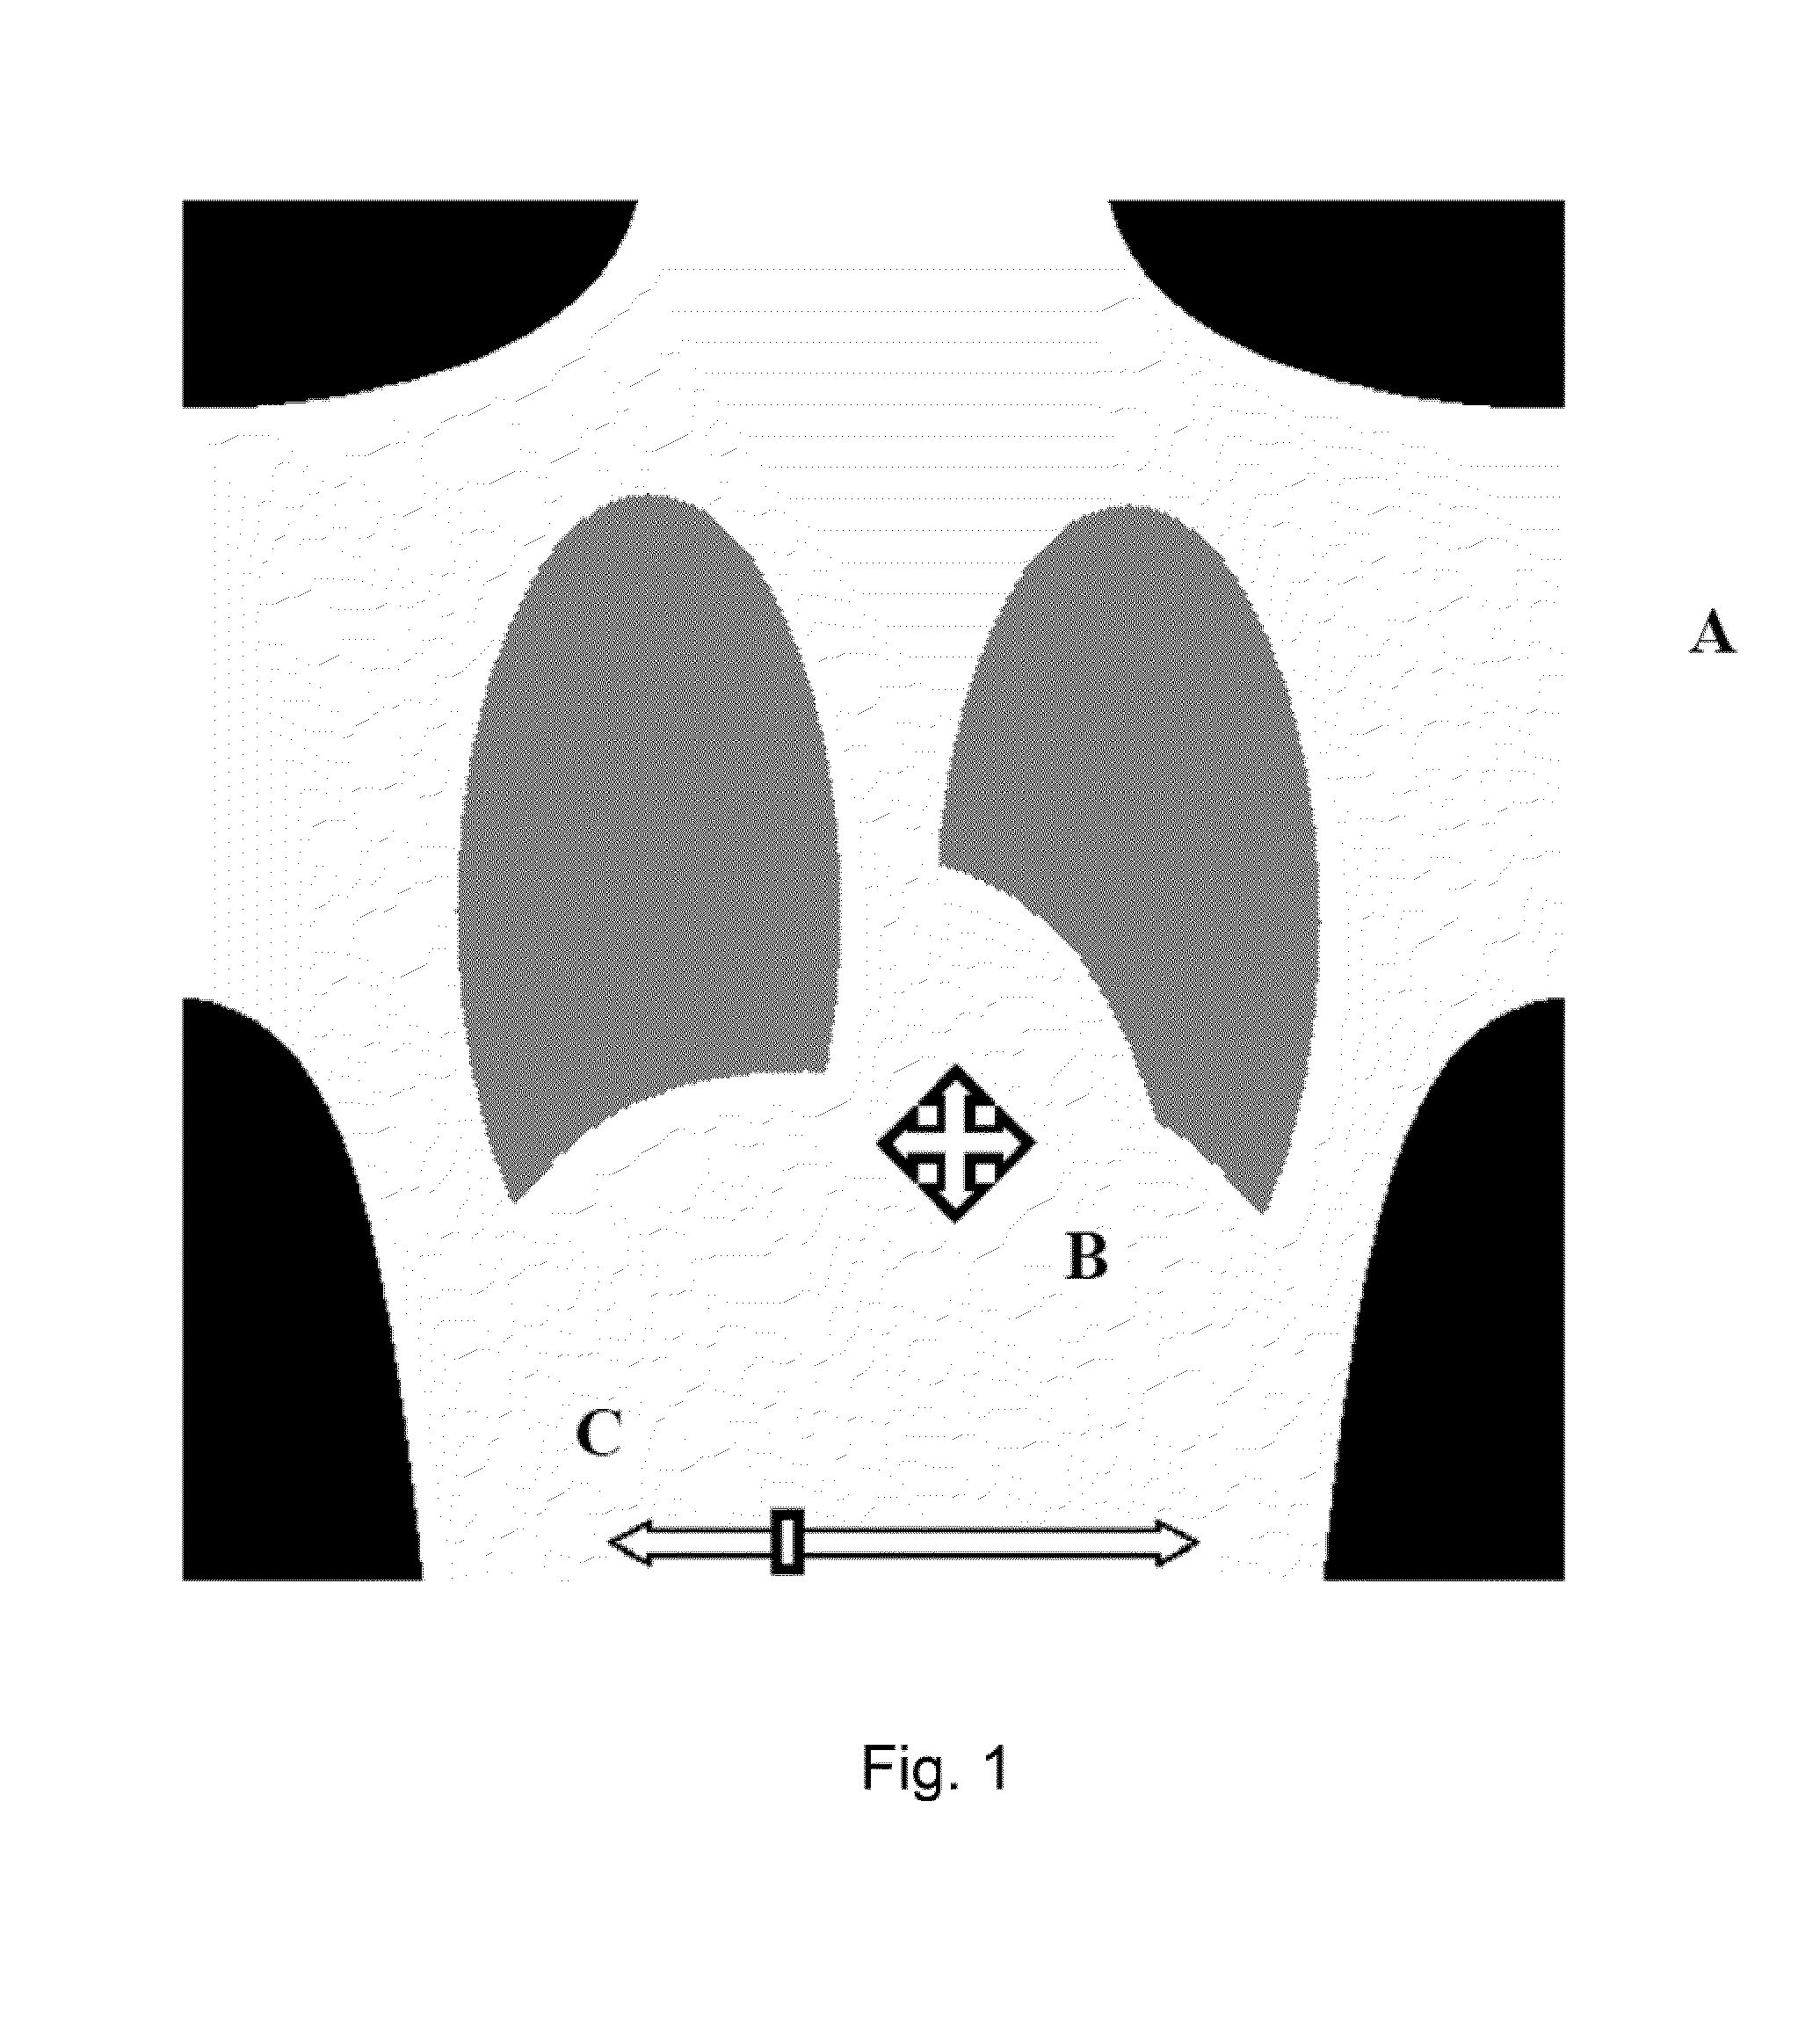 Method and System for Changing Image Density and Contrast